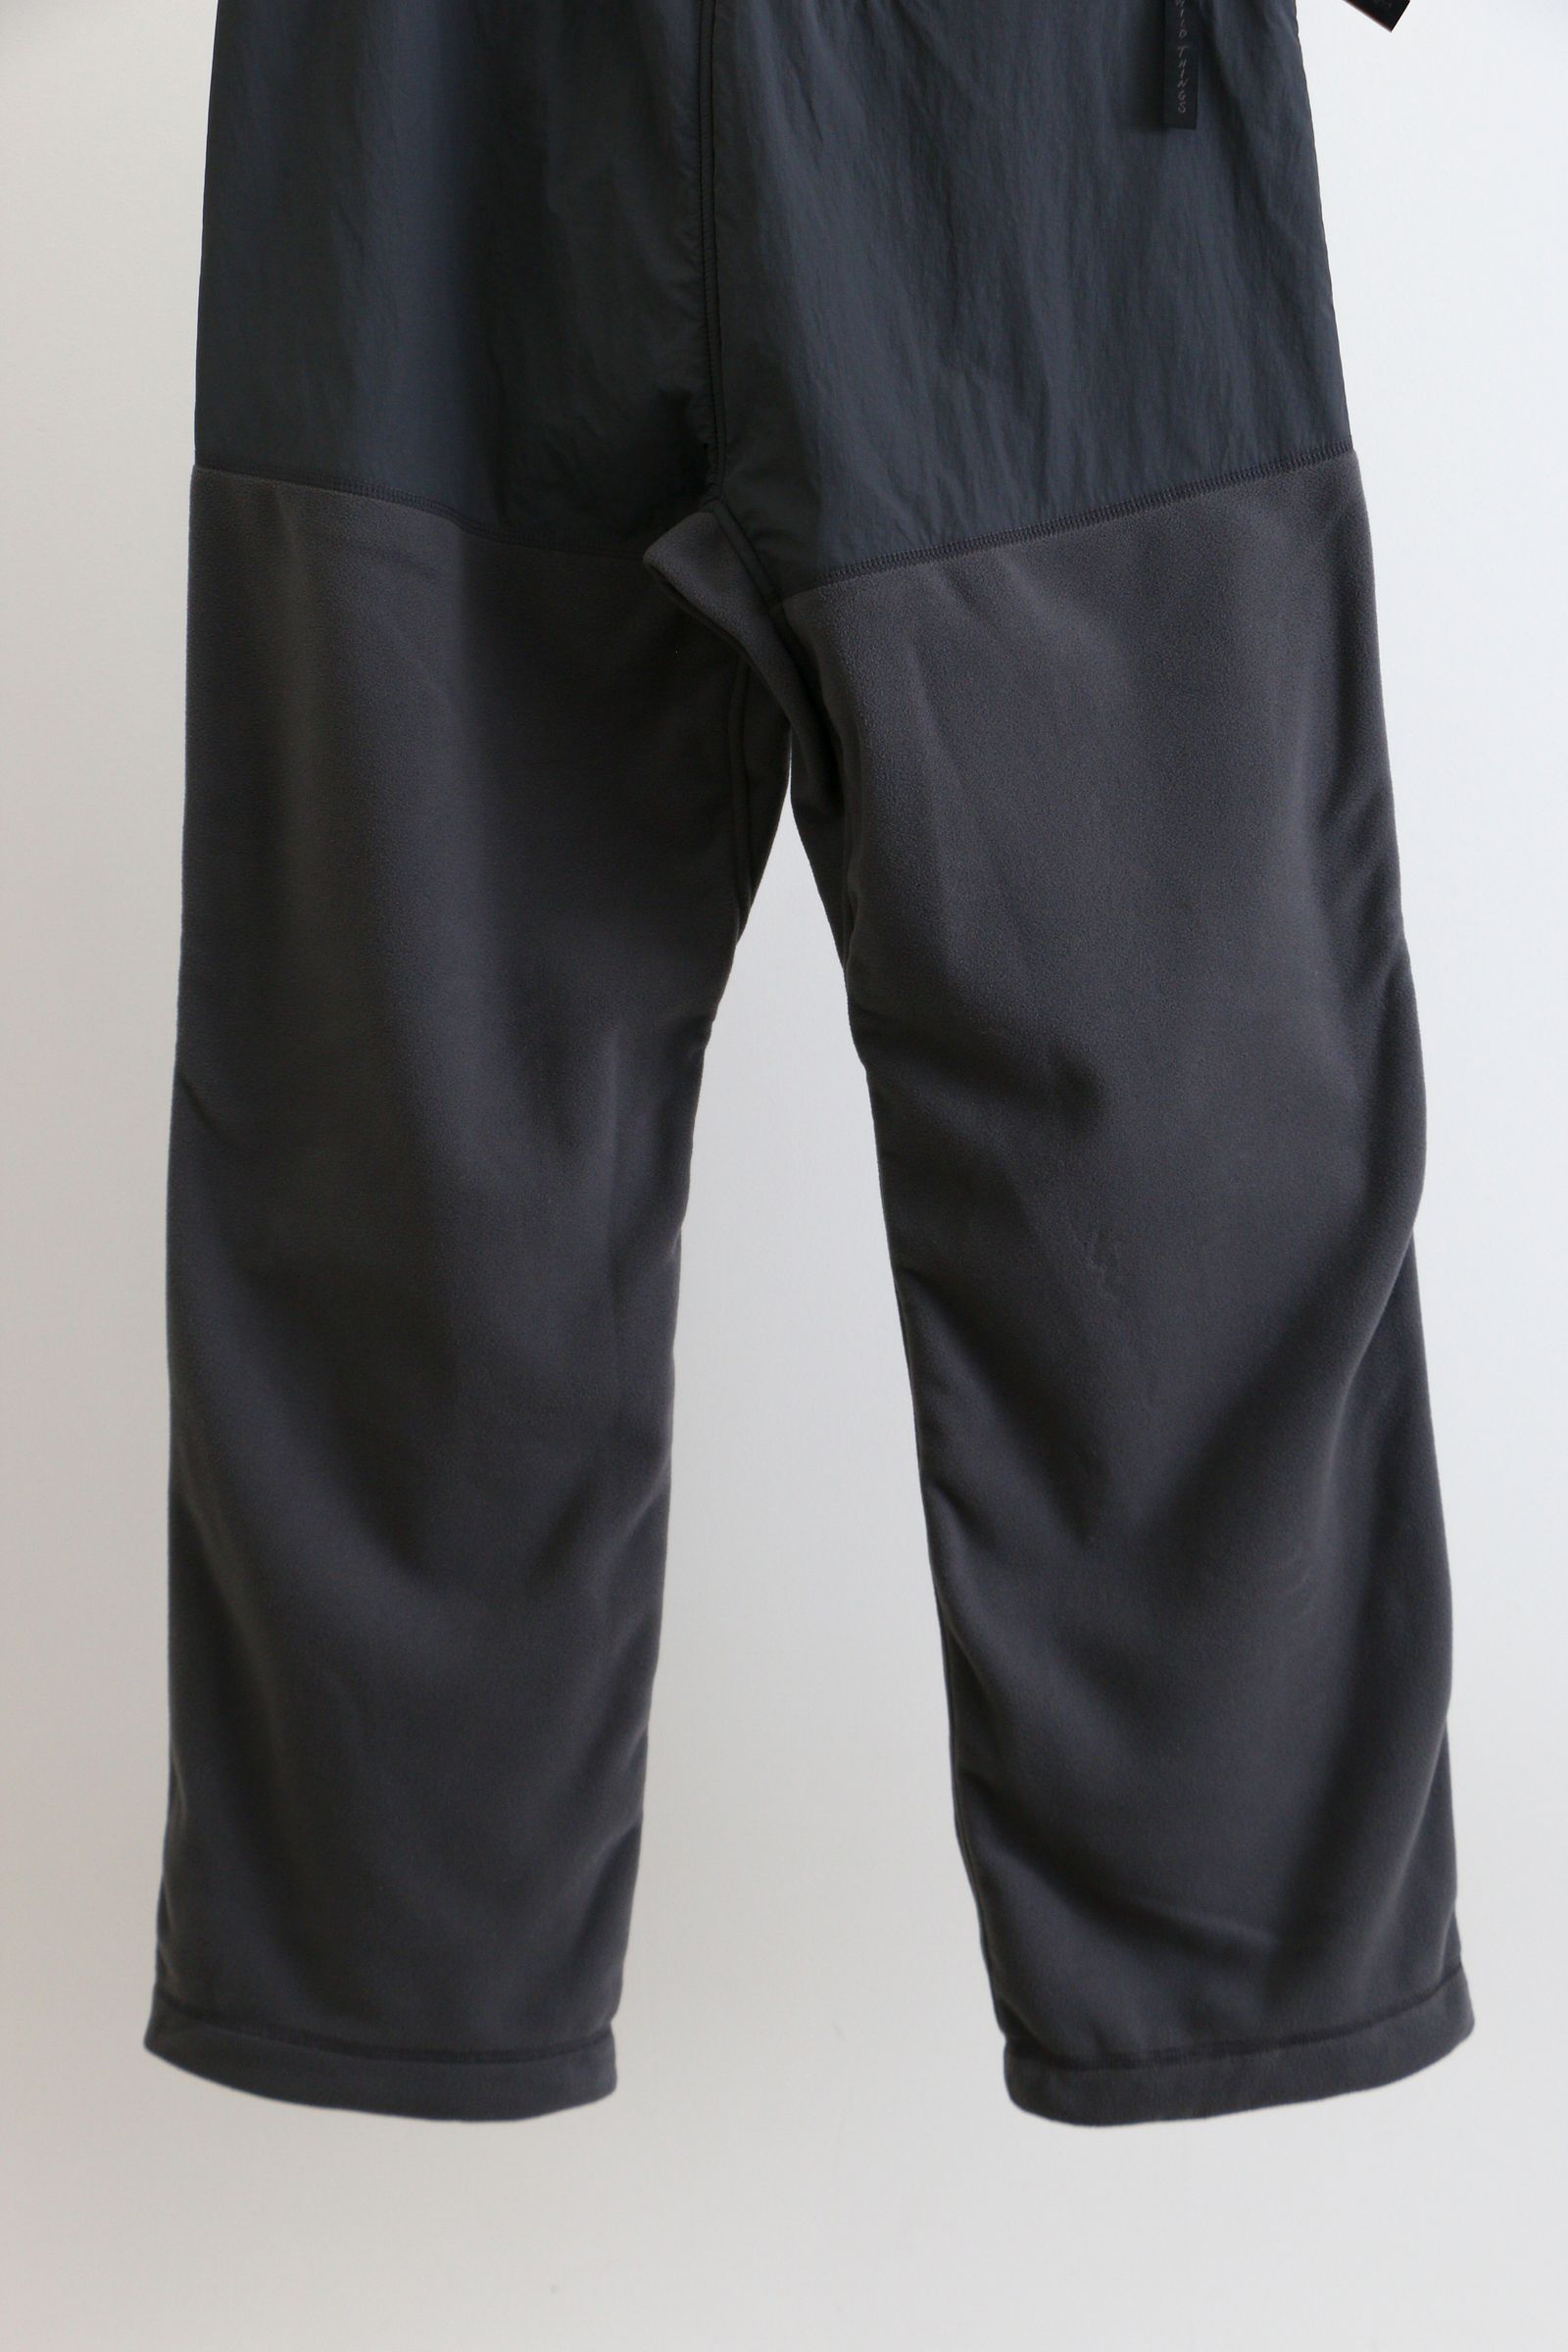 WILD THINGS - POLARTEC Wind Pro COMFY PANTS / GREY / ポーラテック